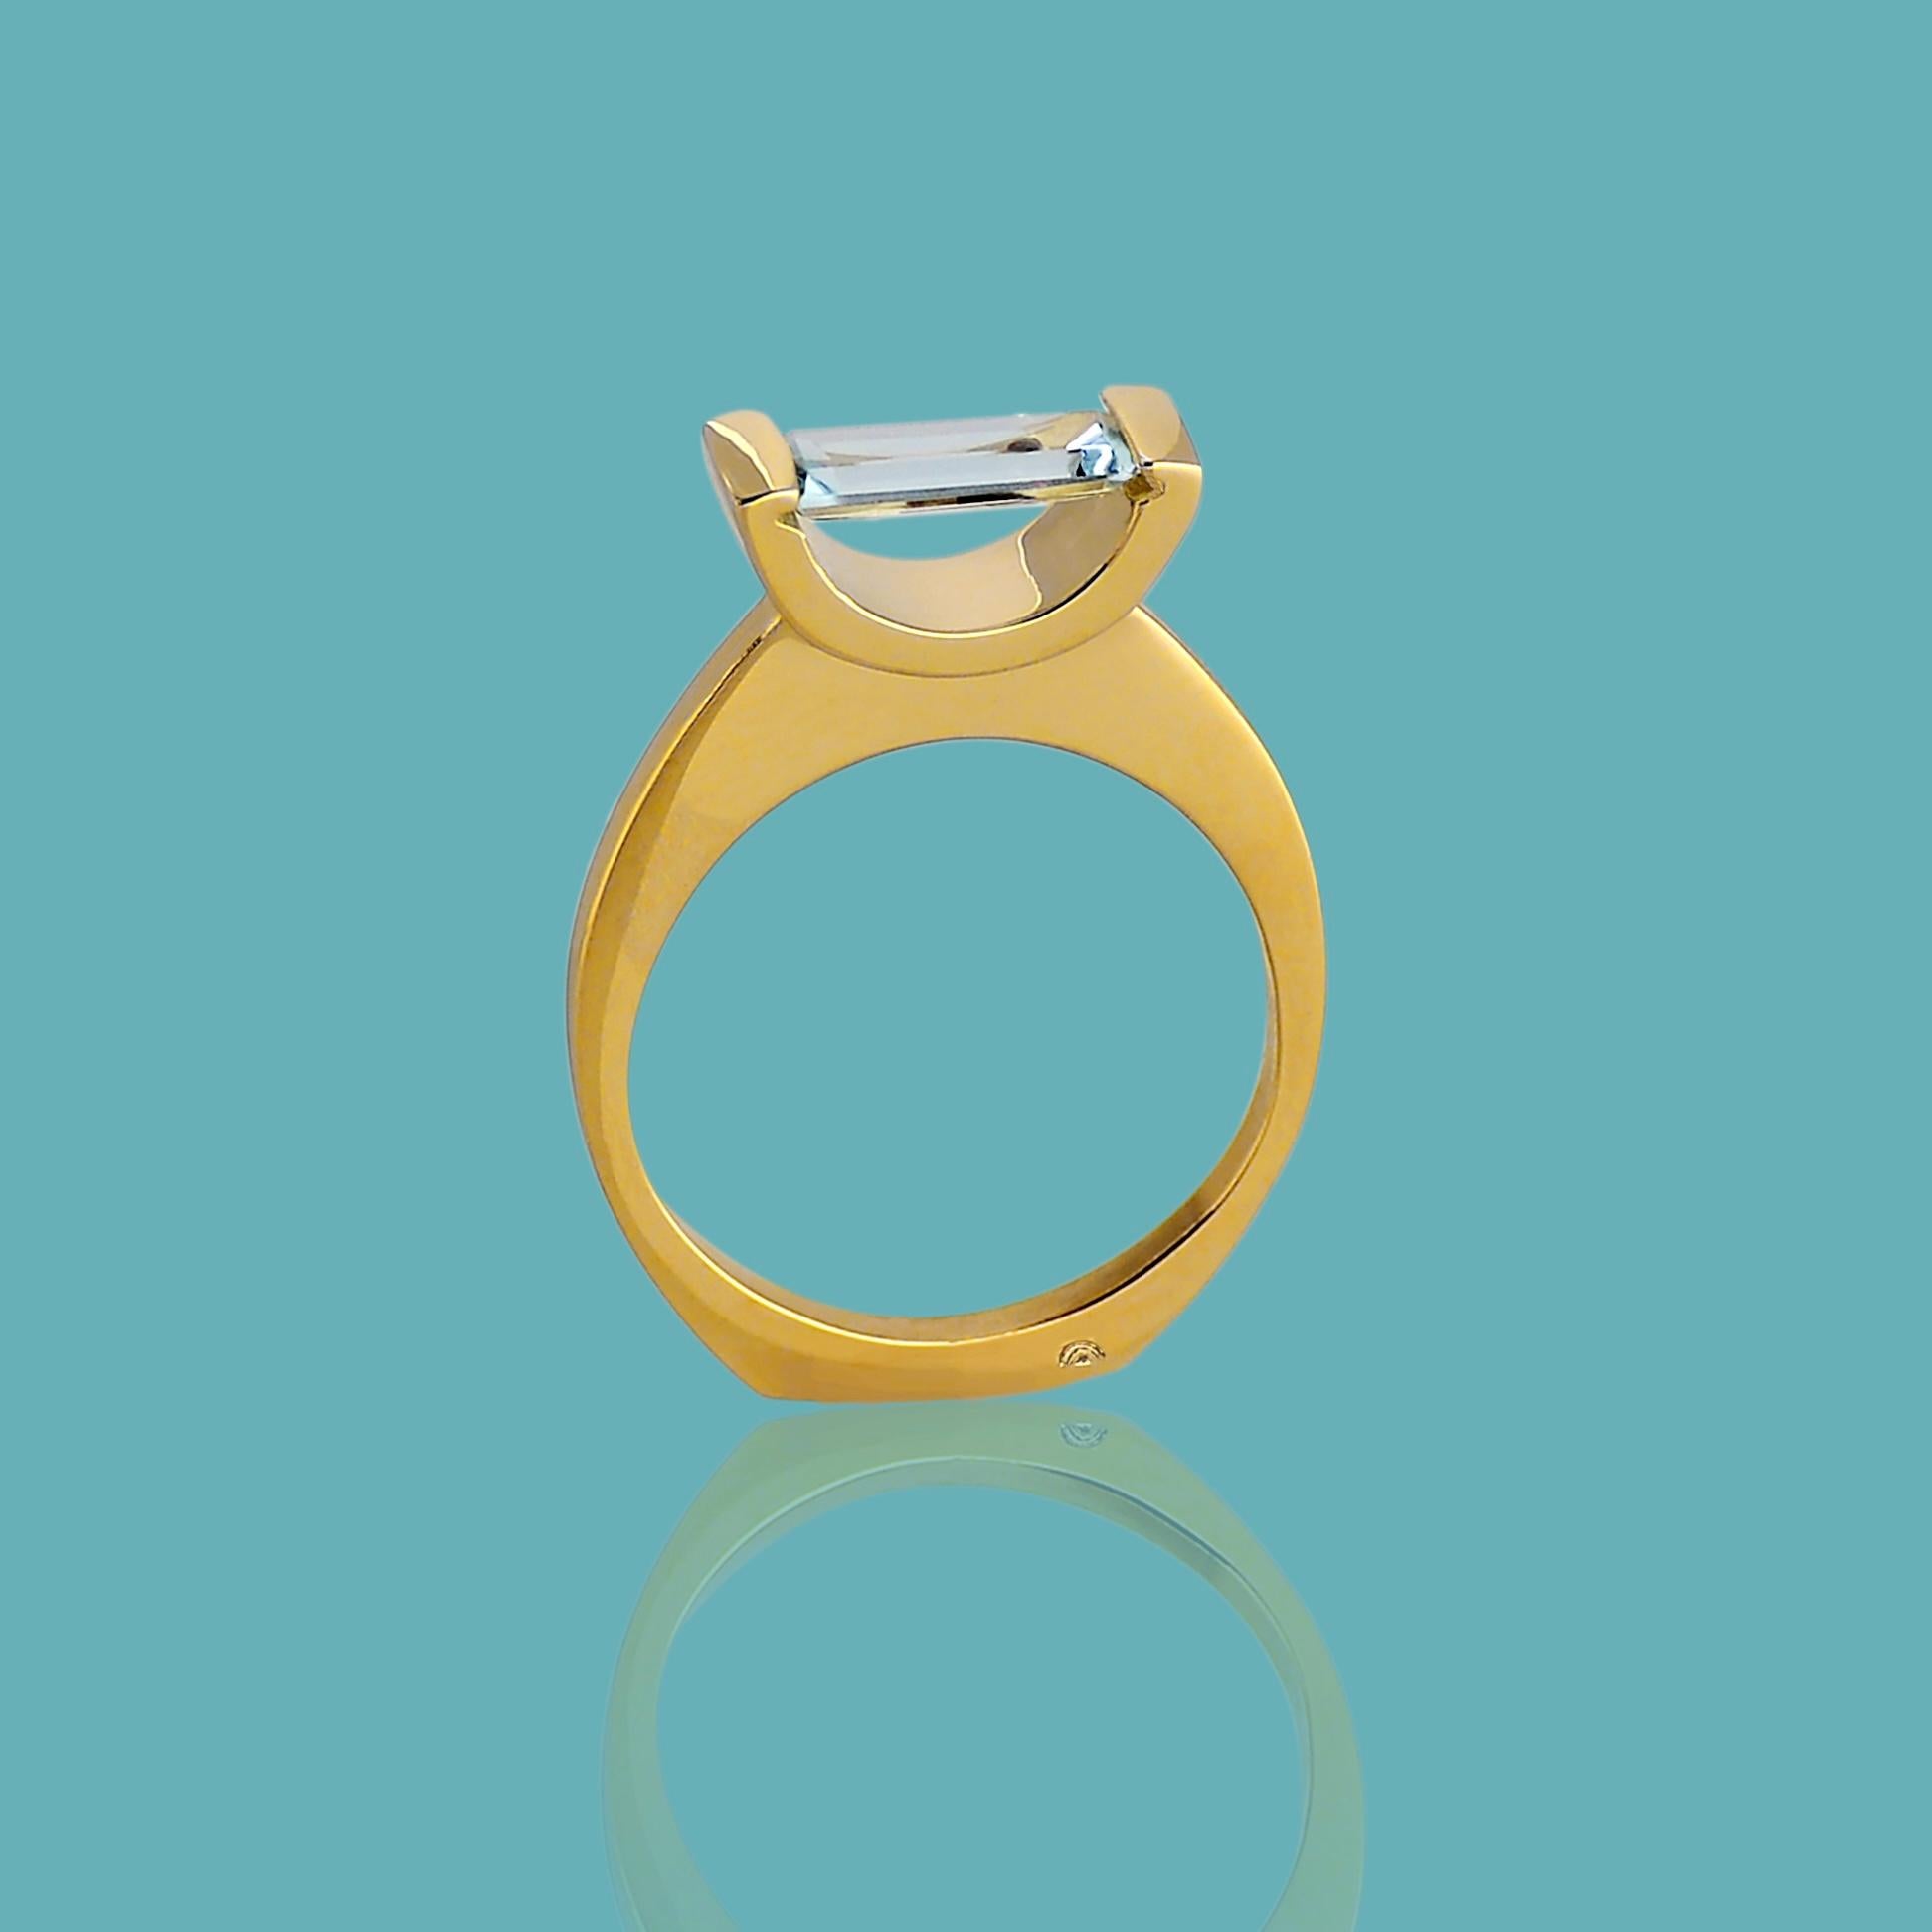 Contemporary Susan Crow Studio Fairmined Gold and Aquamarine Sliver of Water Ring For Sale